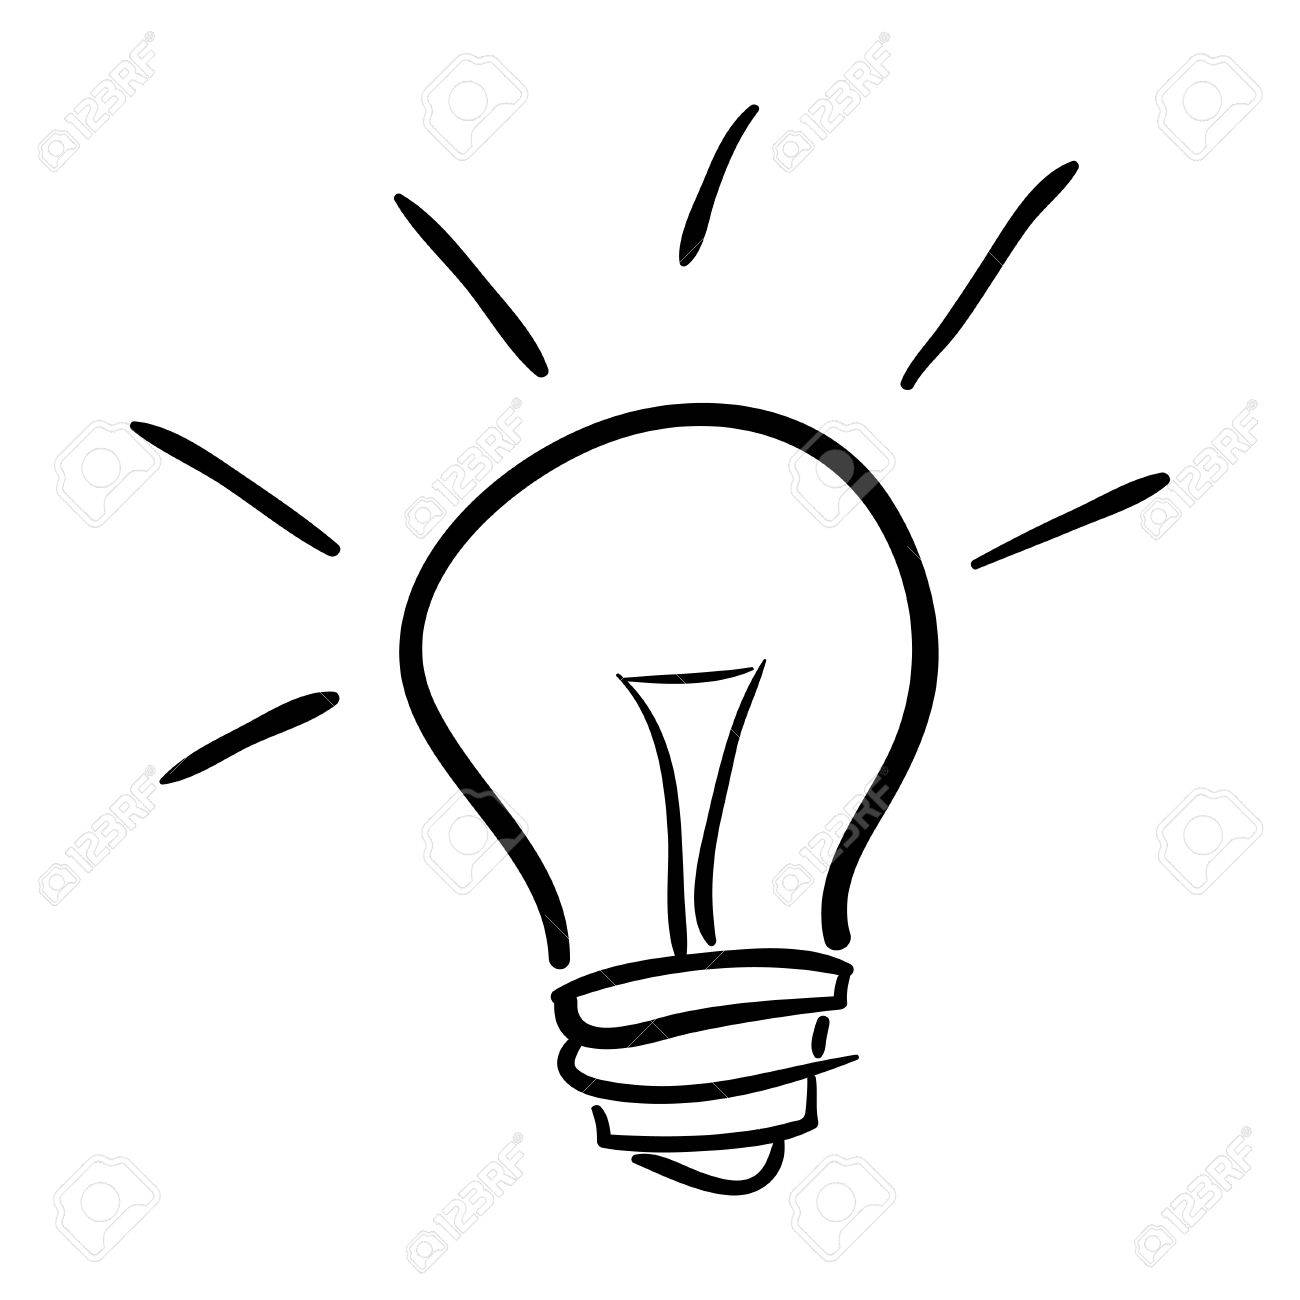 Hand drawn bulb isolated on white background, vector